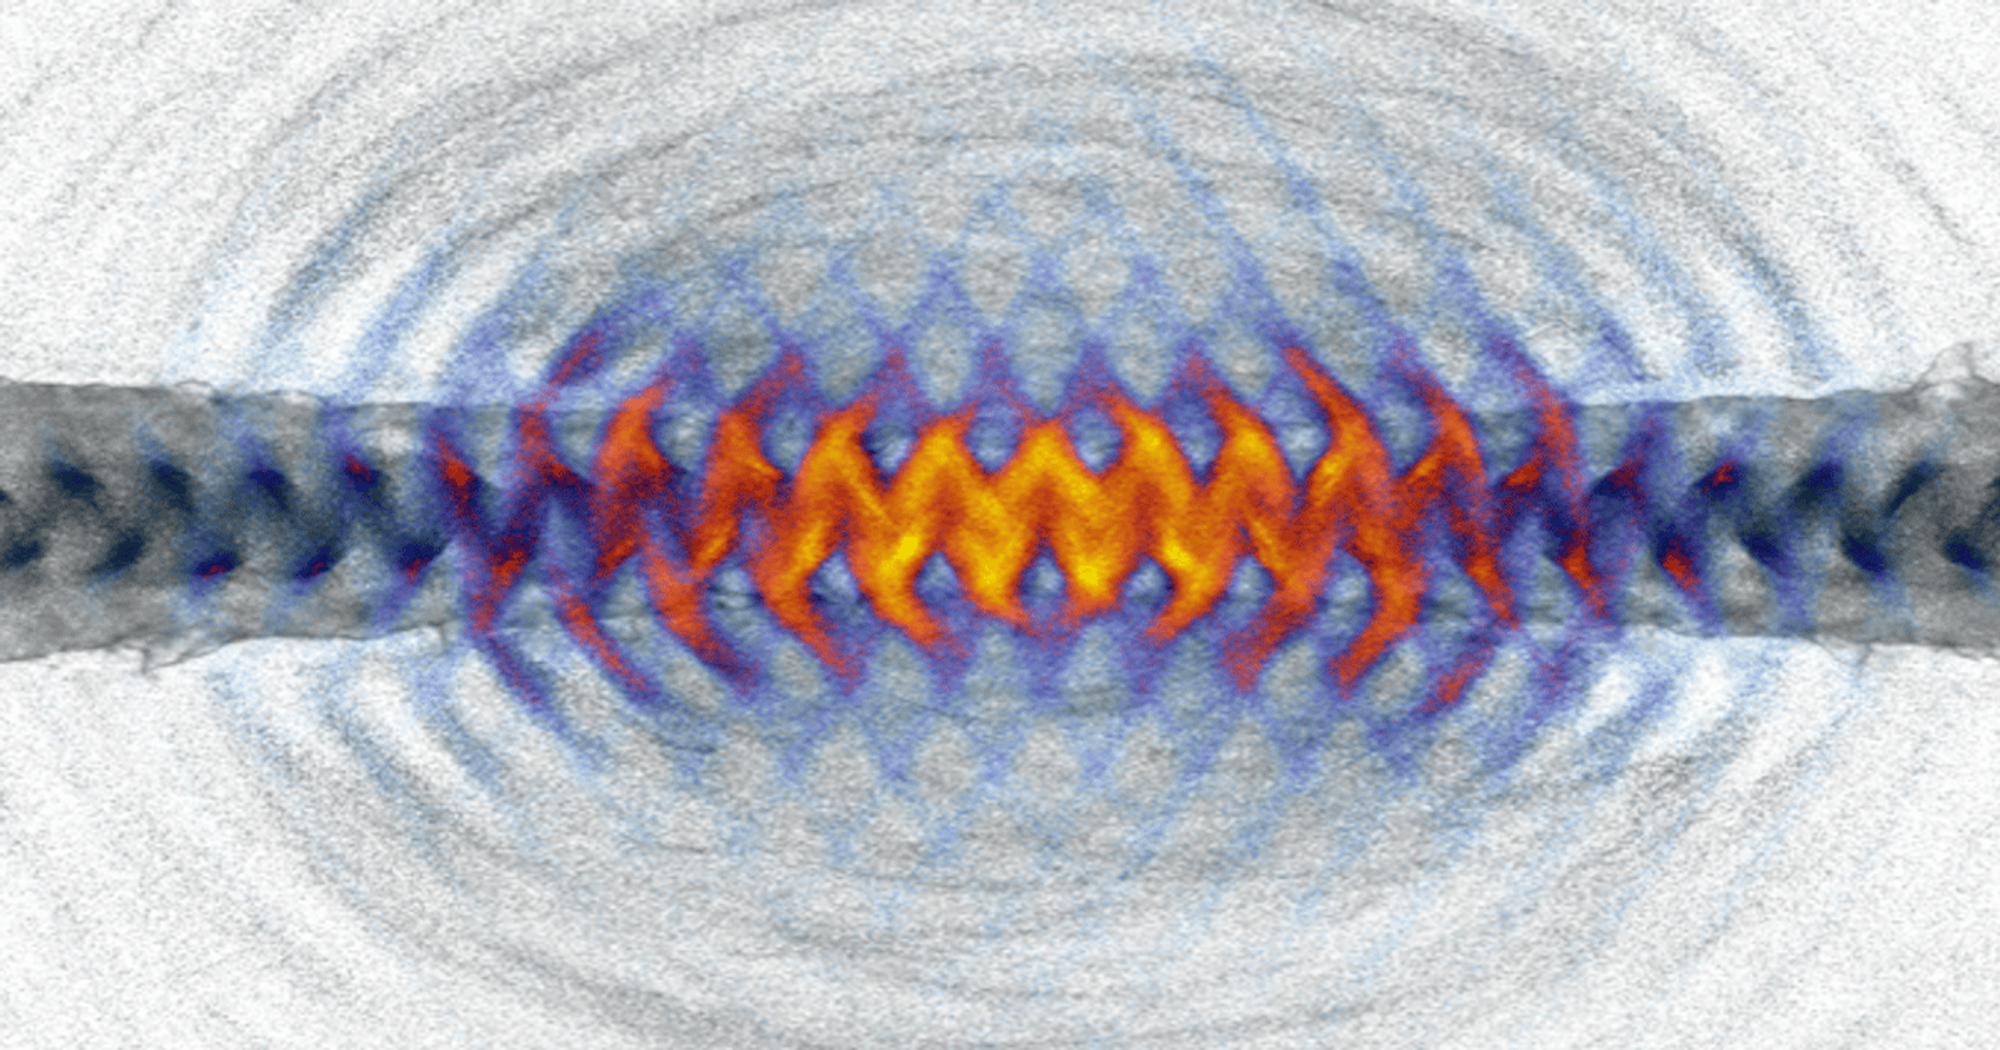 Laser pincers generate antimatter by recreating neutron star conditions